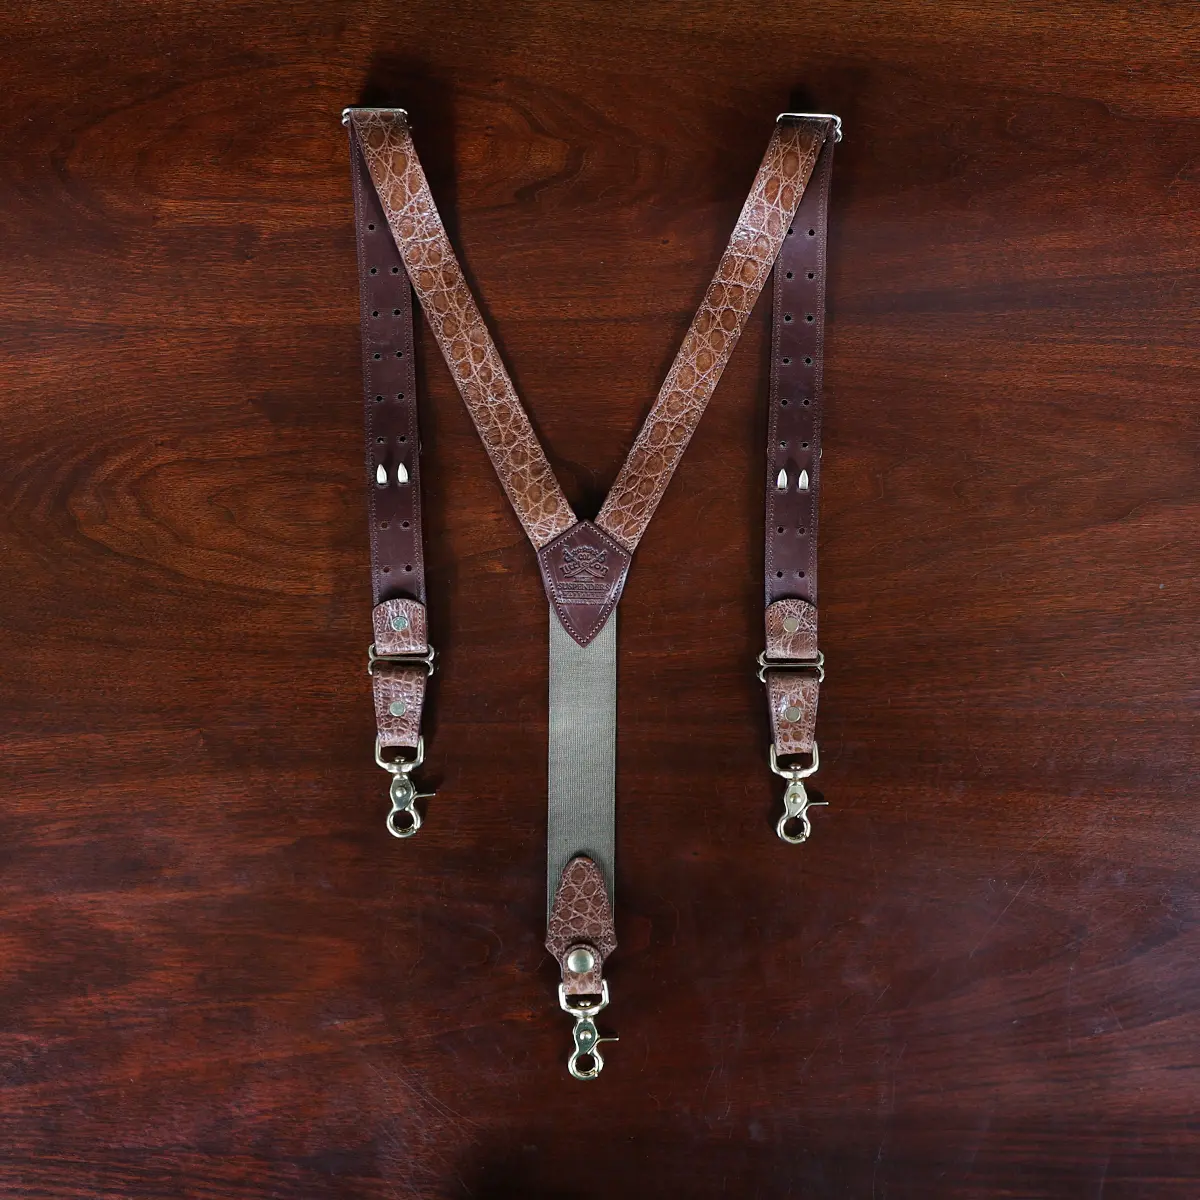 no 3 leather alligator suspenders on wood table - back view - id 001